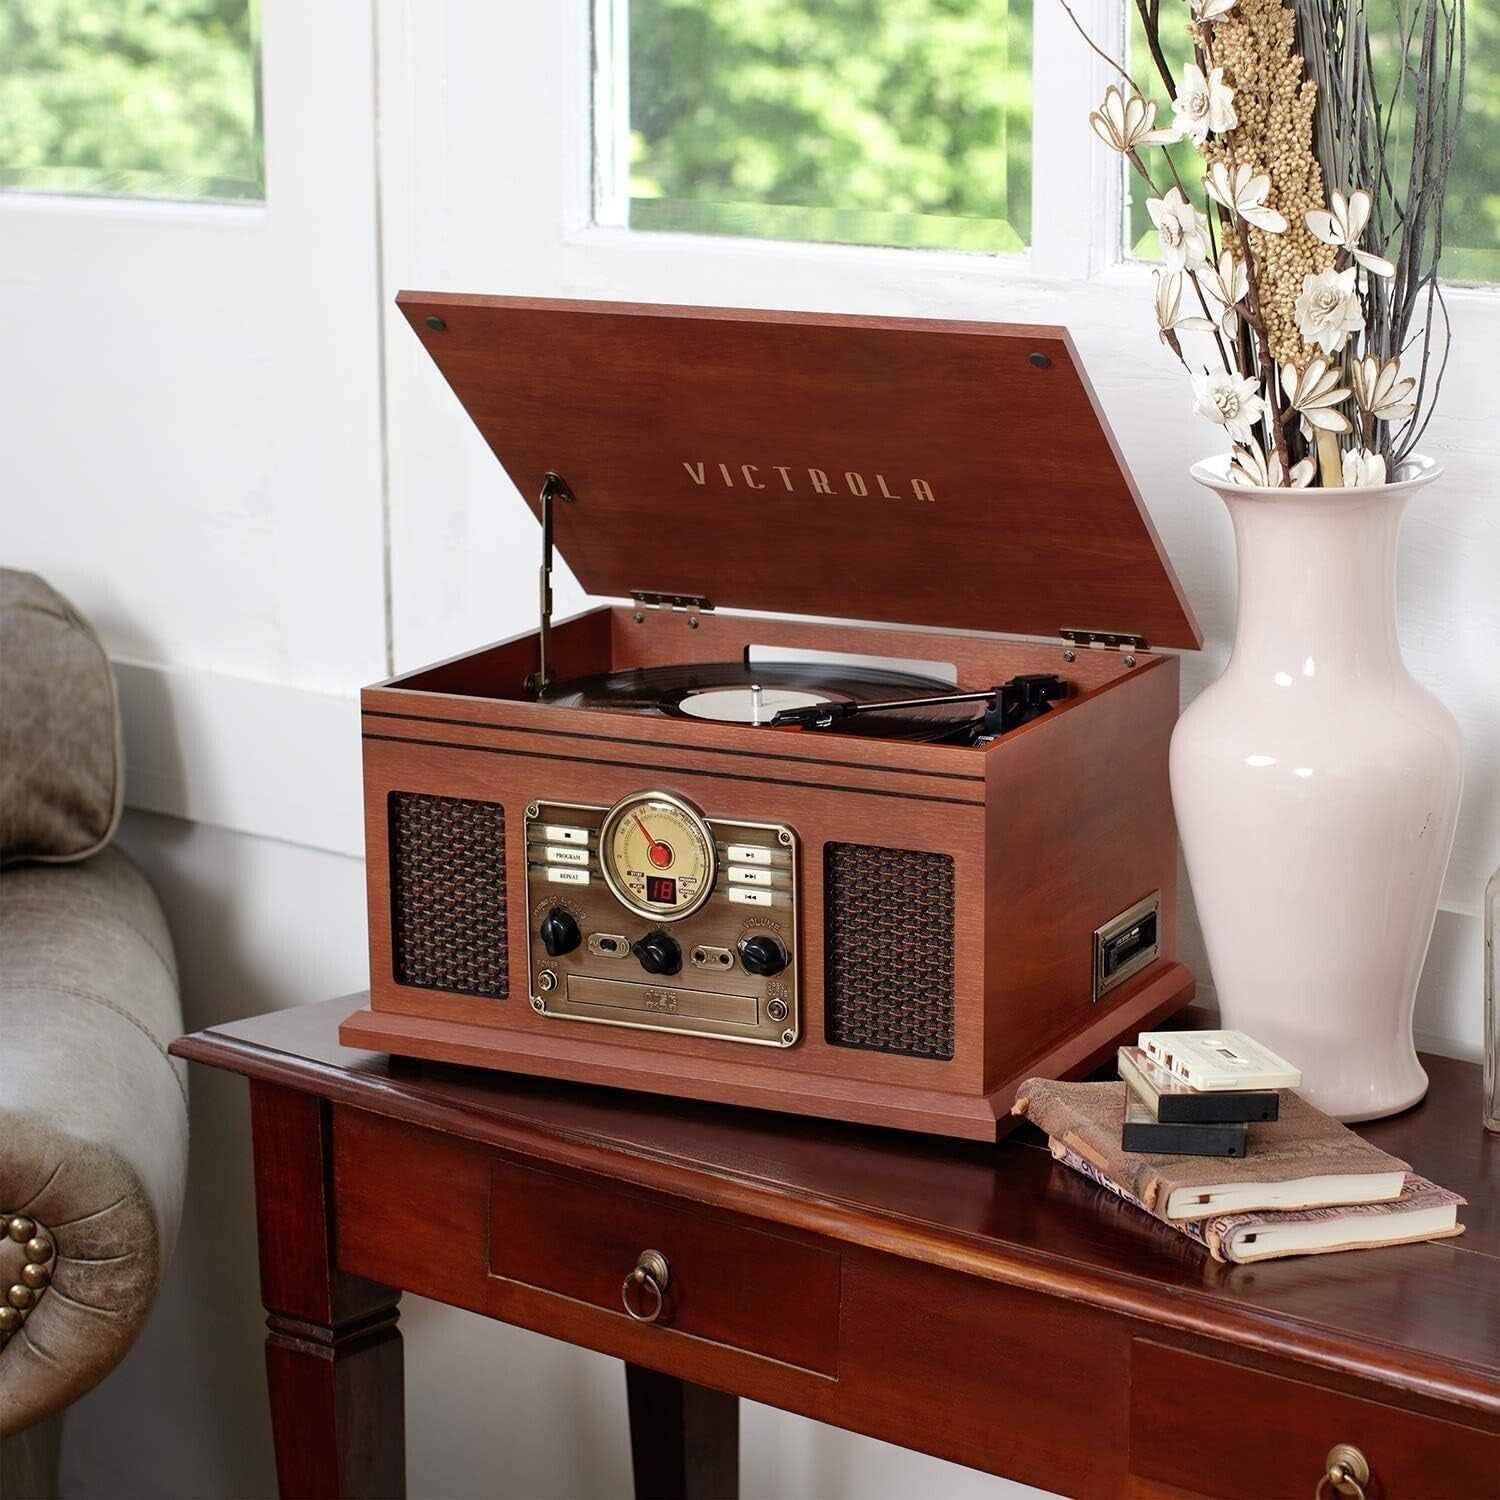 Nostalgic 6-In-1 Bluetooth Record Player & Multimedia Center with Built-In Speakers - 3-Speed Turntable, CD & Cassette Player, FM Radio | Wireless Music Streaming | Mahogany